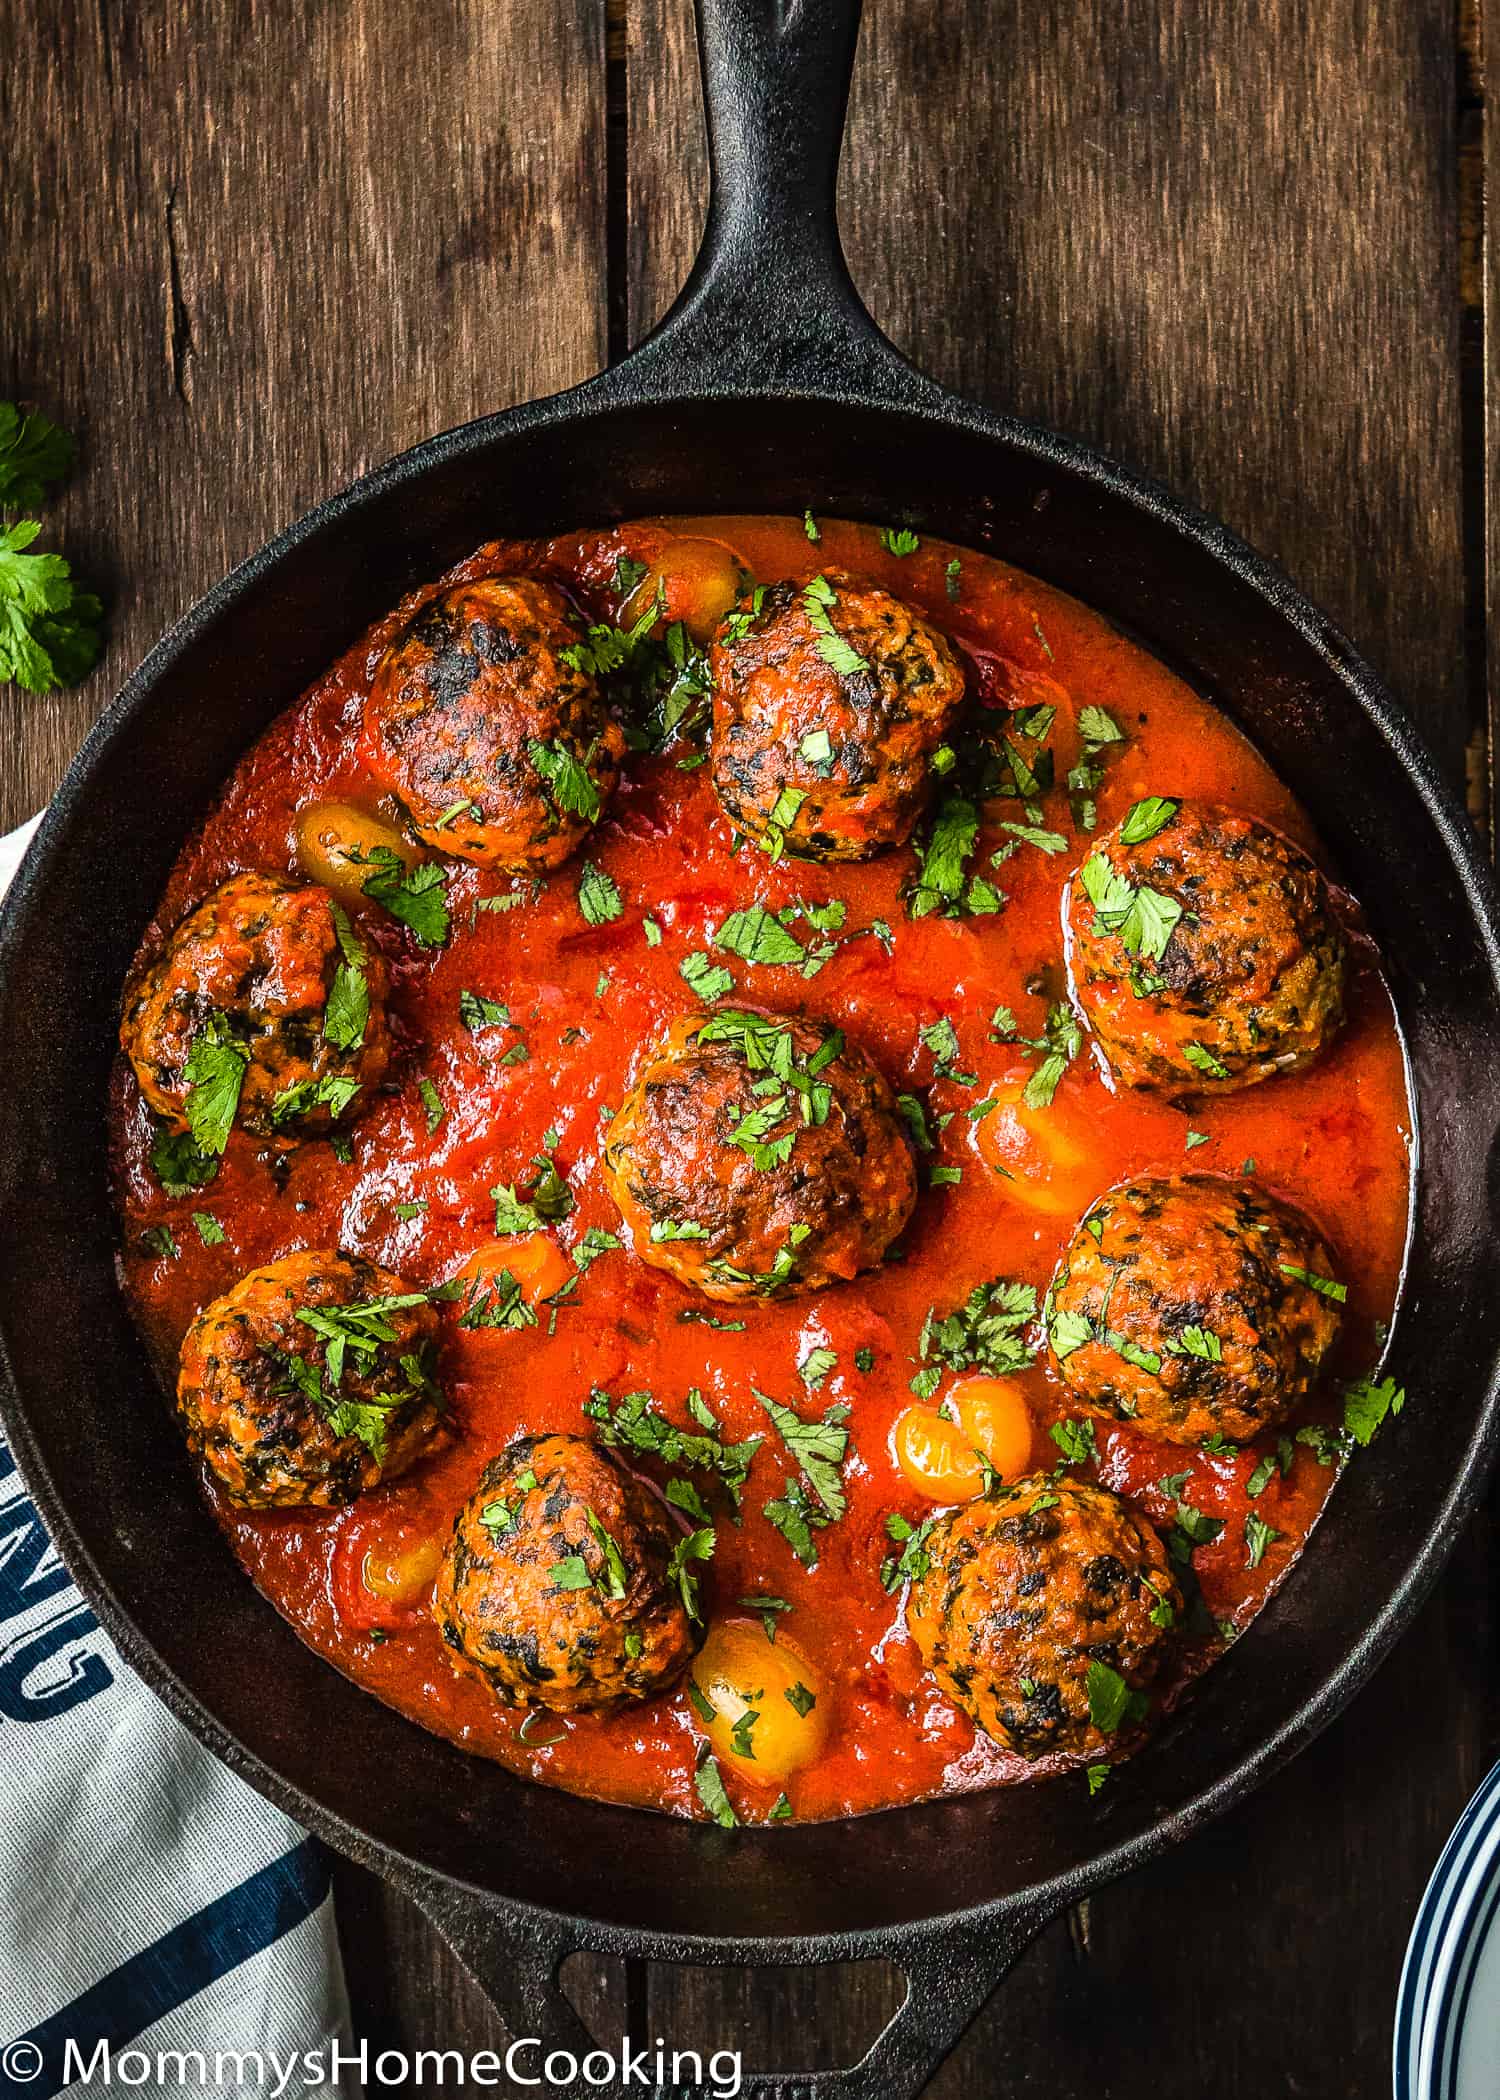 egg-free turkey meatballs with marinara sauce in a skillet over a wooden surface.